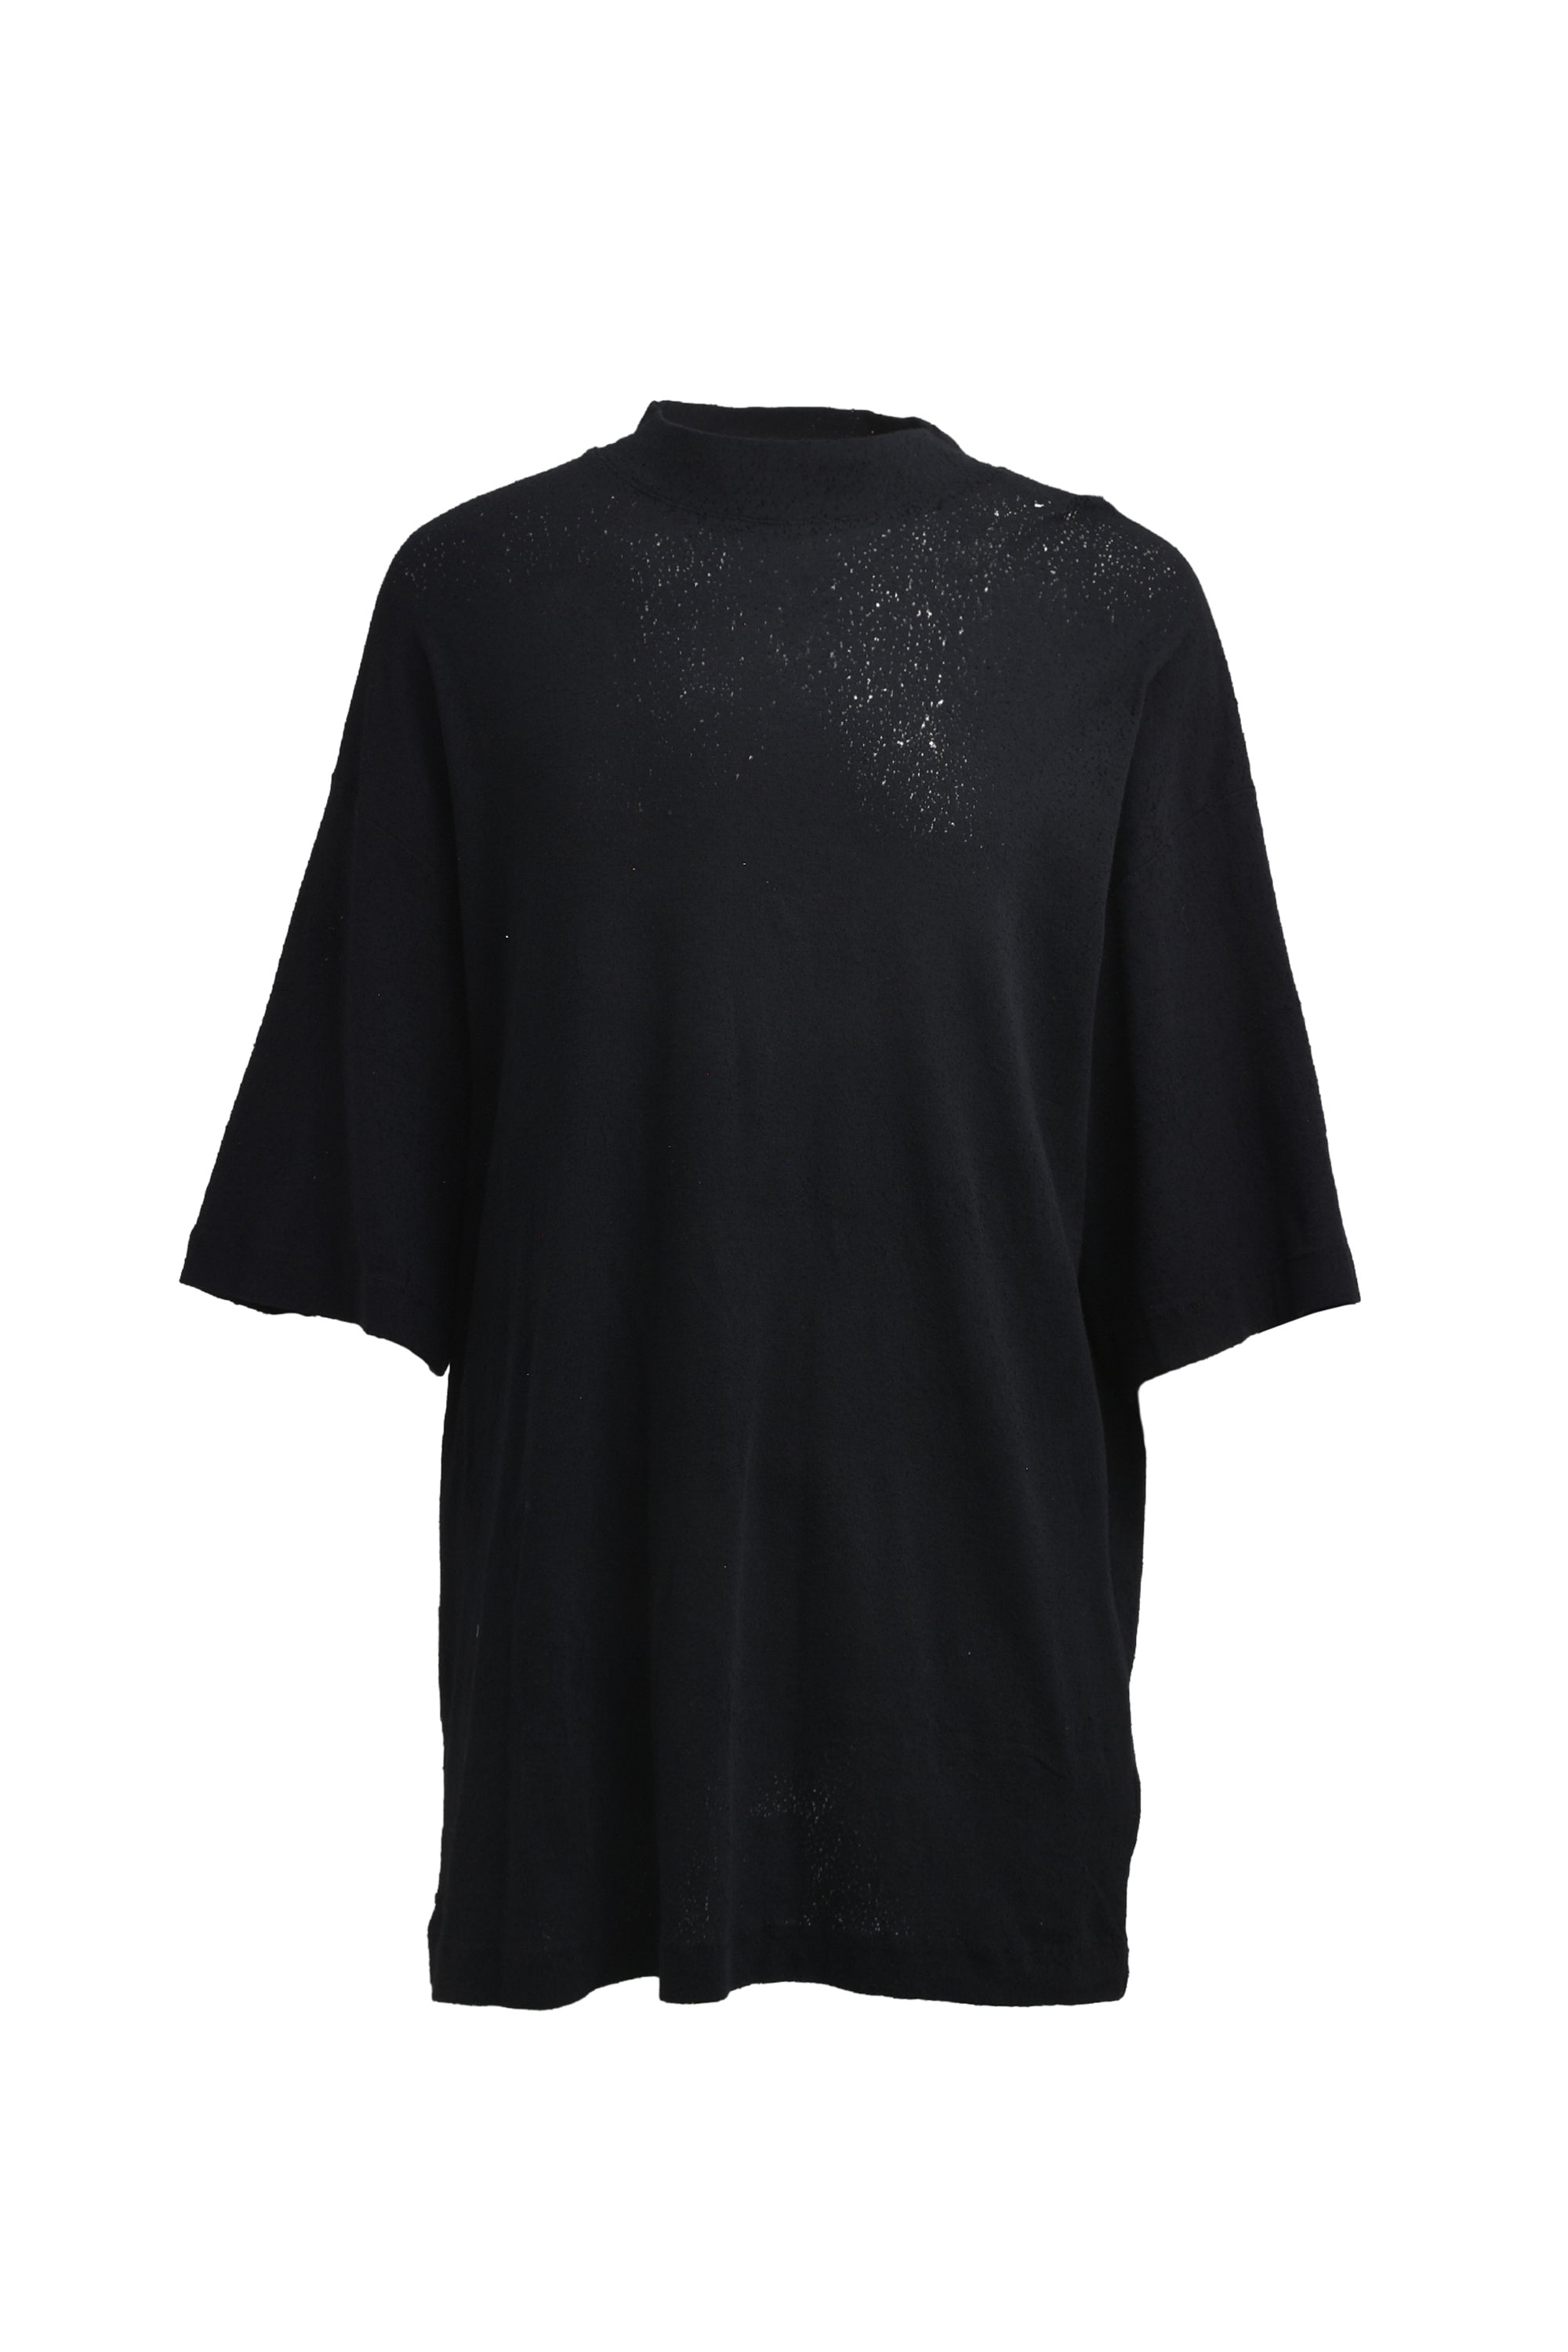 1017 ALYX 9SM アリクス SS24 DISTRESSED OVERSIZED T-SHIRT / BLK 